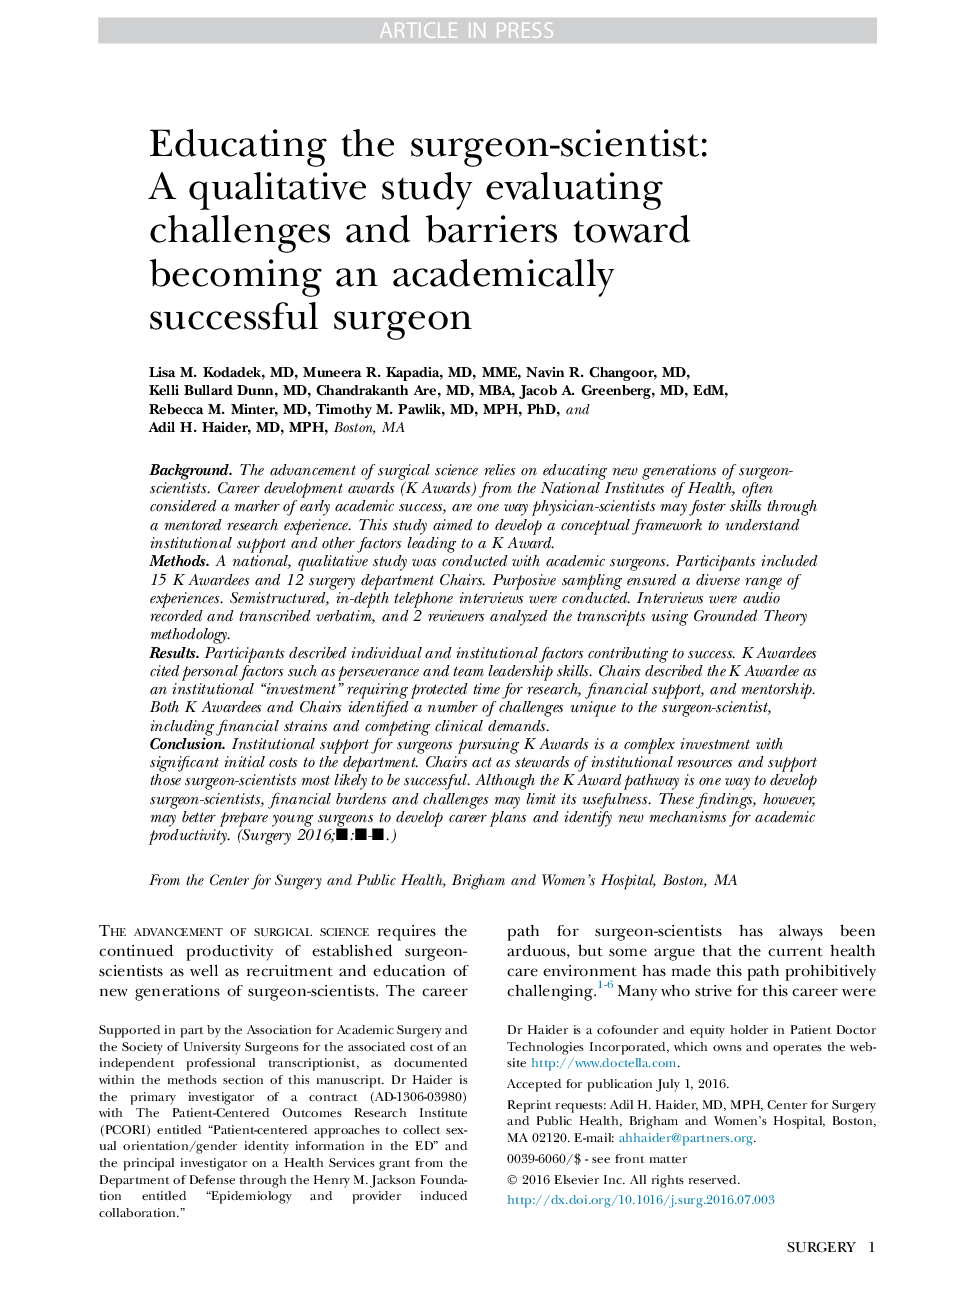 Educating the surgeon-scientist: A qualitative study evaluating challenges and barriers toward becoming an academically successful surgeon